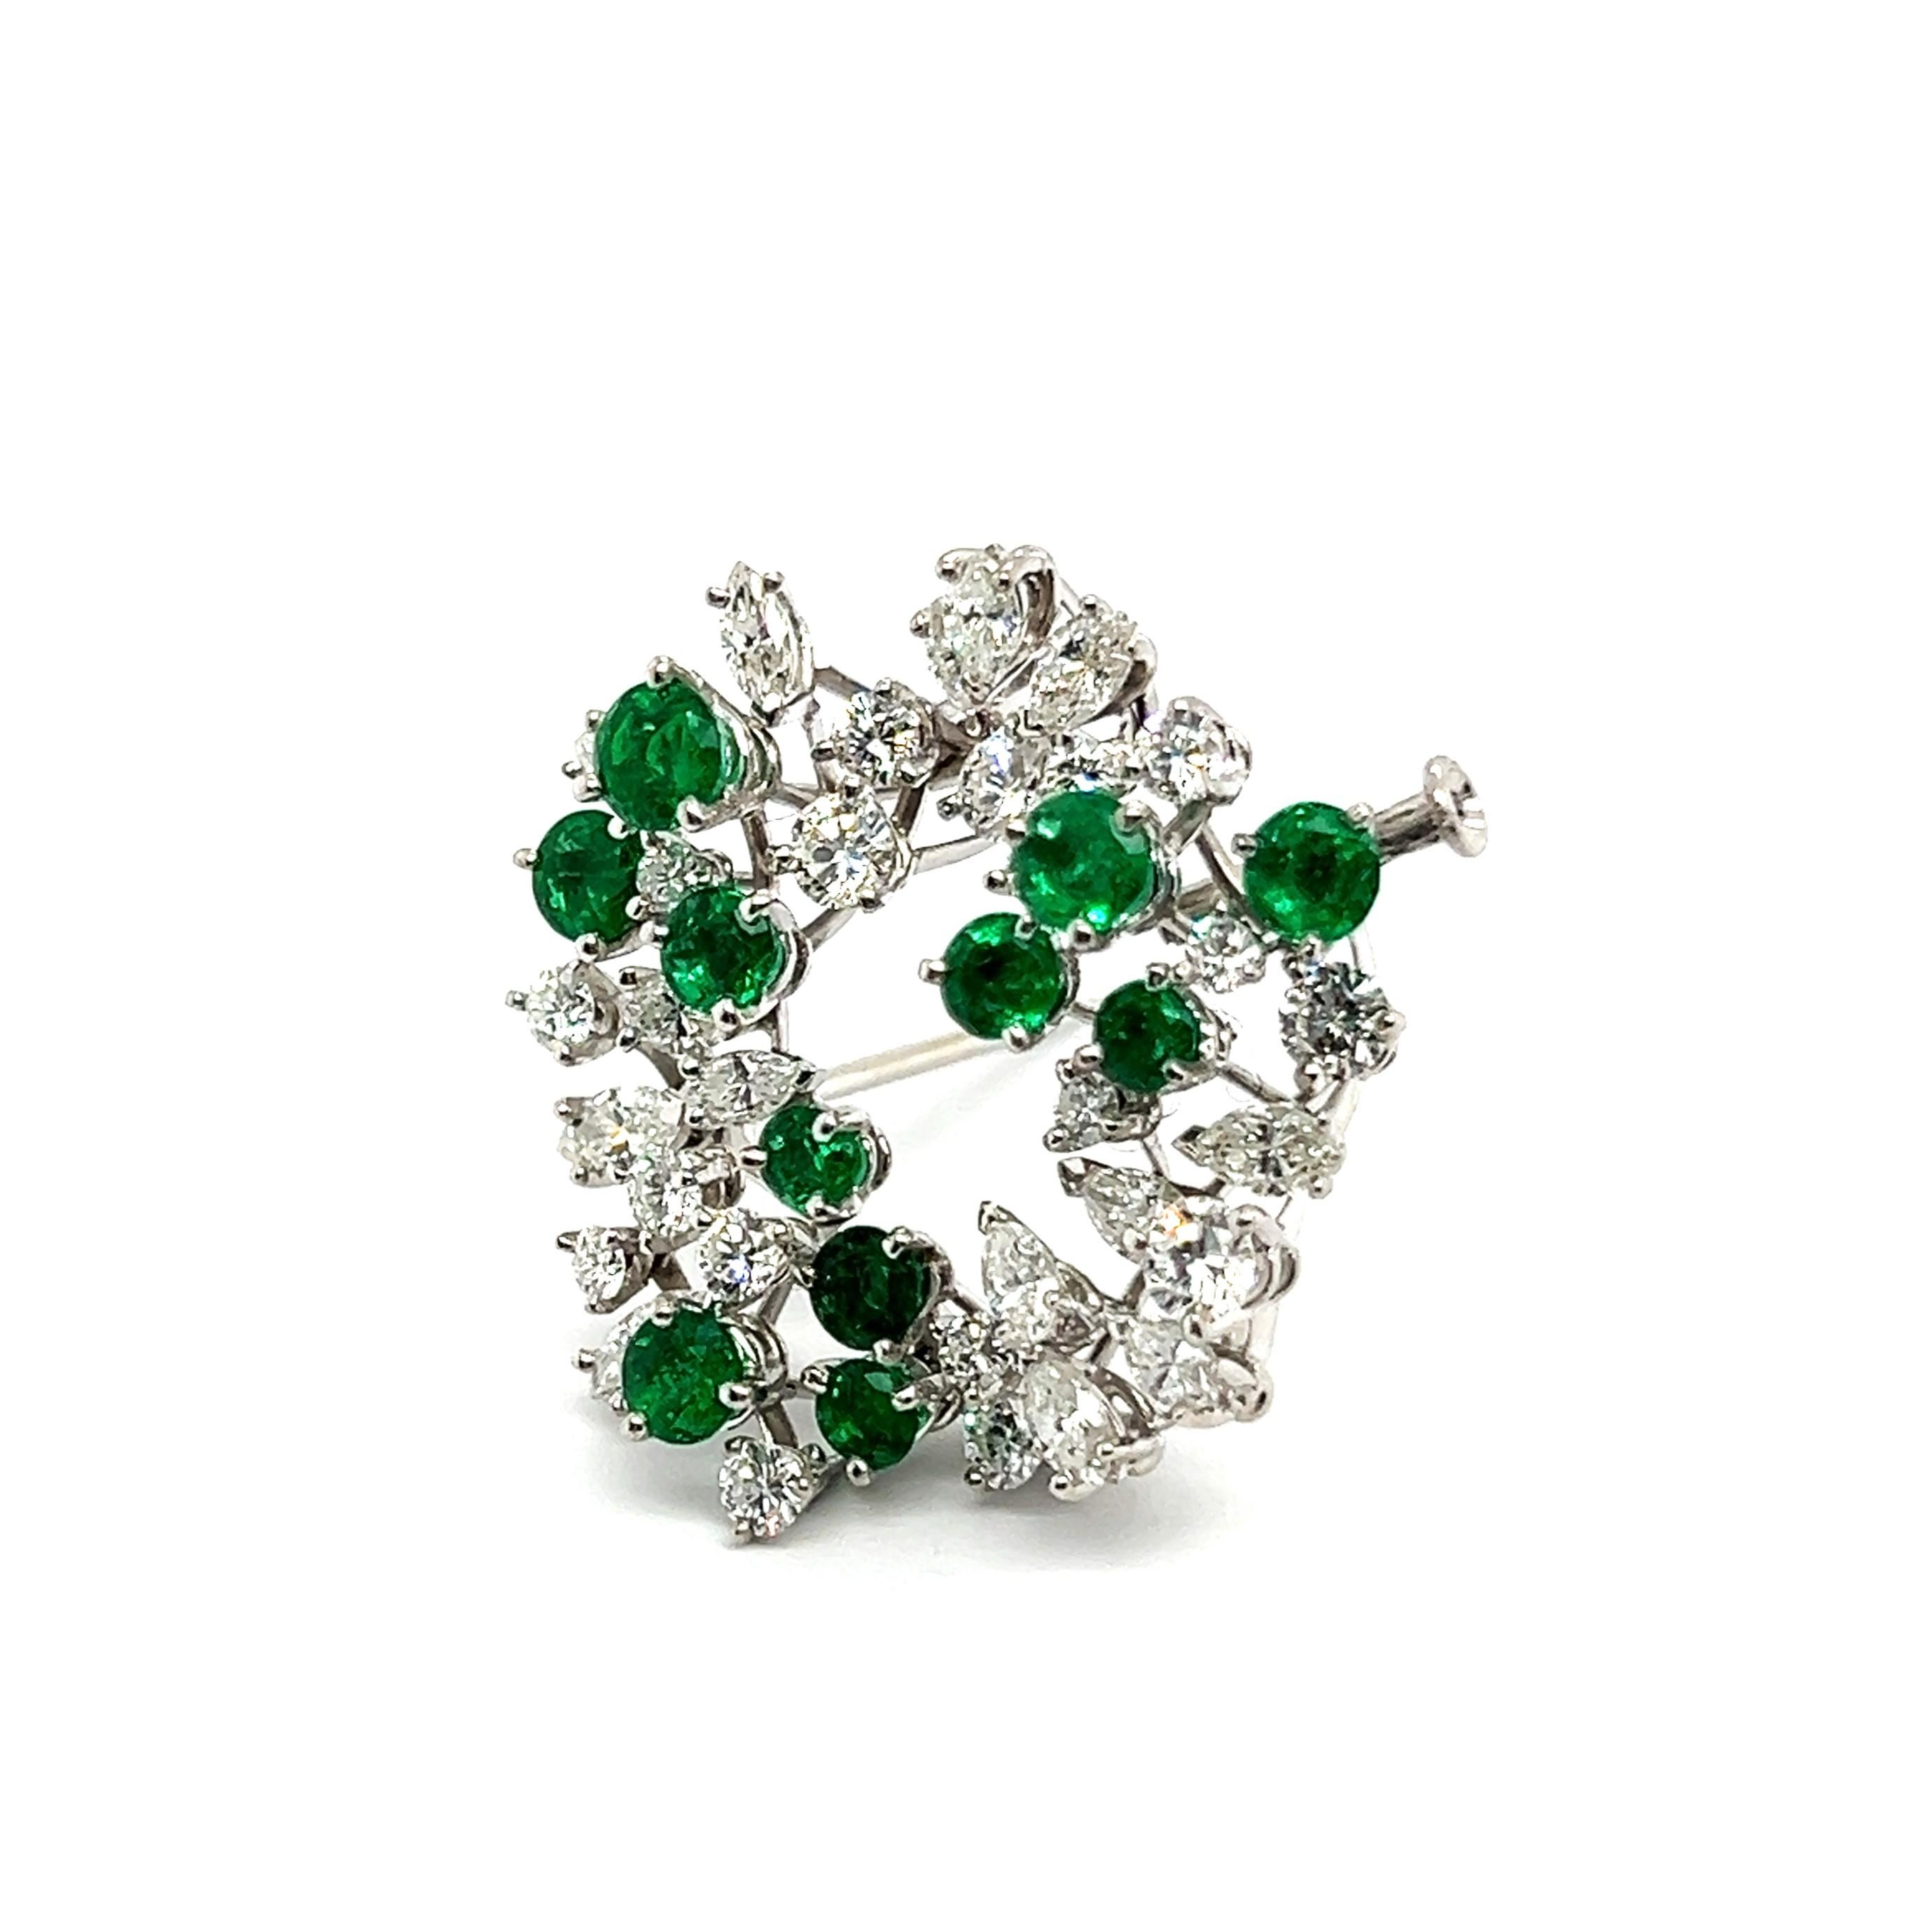 Introducing Meister Jewelers' creation: a brooch infused with the vibrant energy of a young spring, where nature awakens from its deep slumber. 

Created from 18 Karat white gold, adorned with 11 round-cut emeralds totaling 2.00 carats, alongside 17